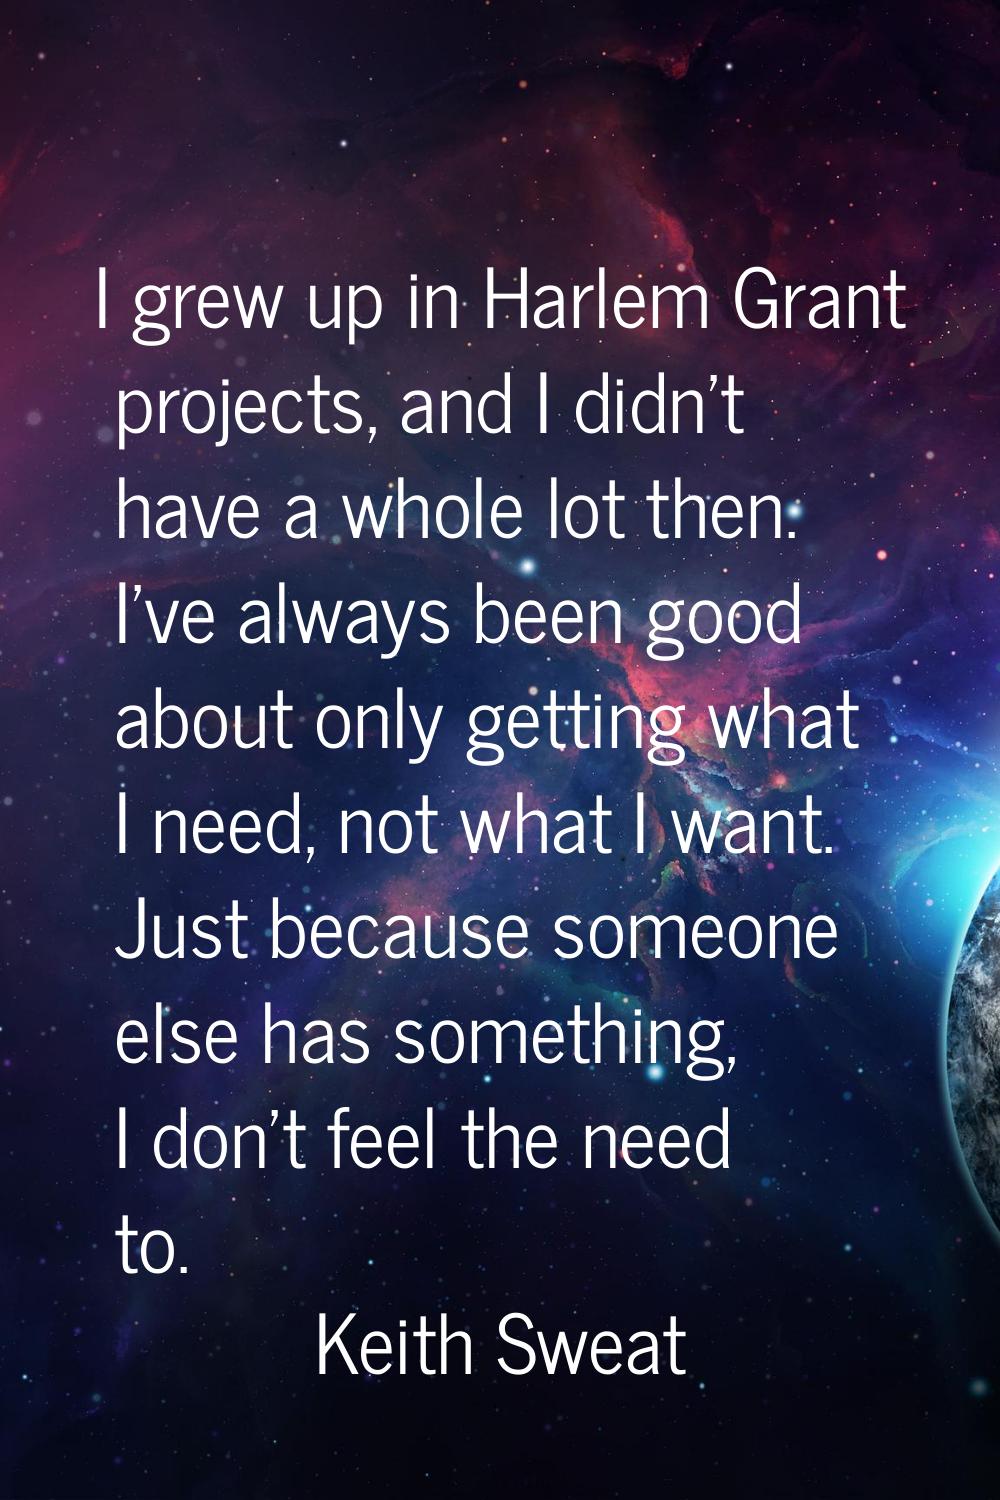 I grew up in Harlem Grant projects, and I didn't have a whole lot then. I've always been good about